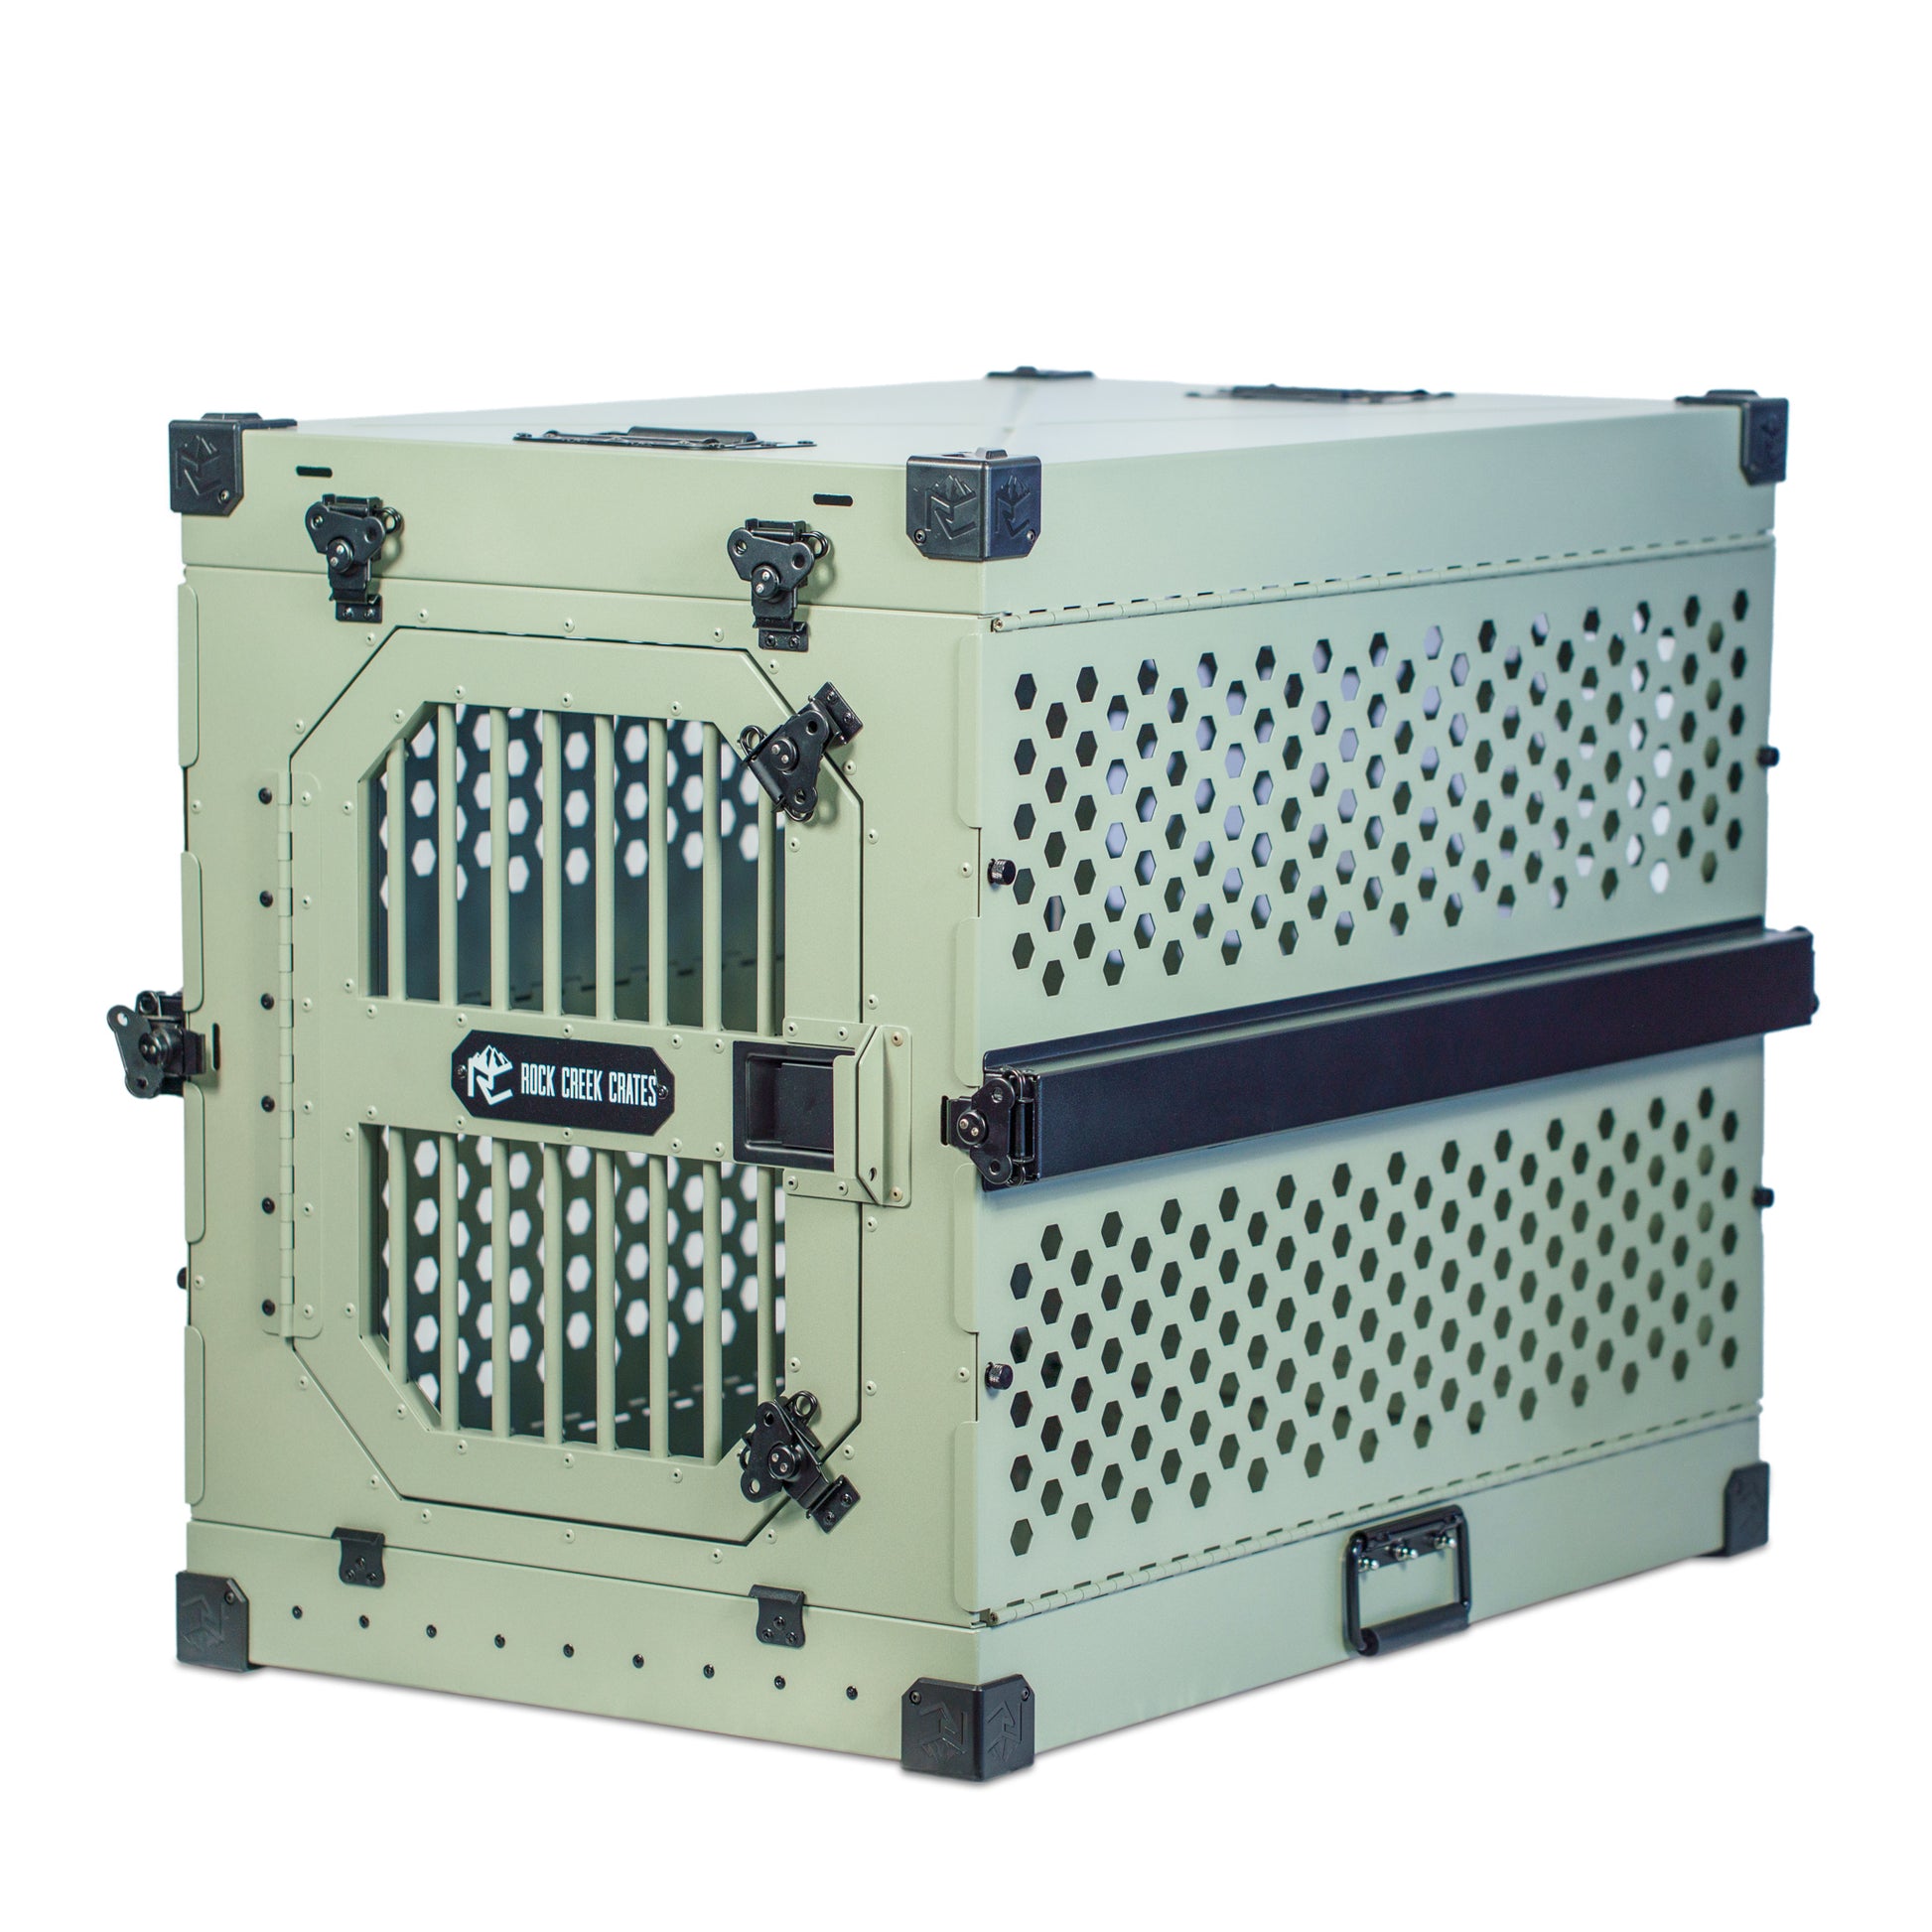 Sage green collapsible dog crate by Rock Creek Crates